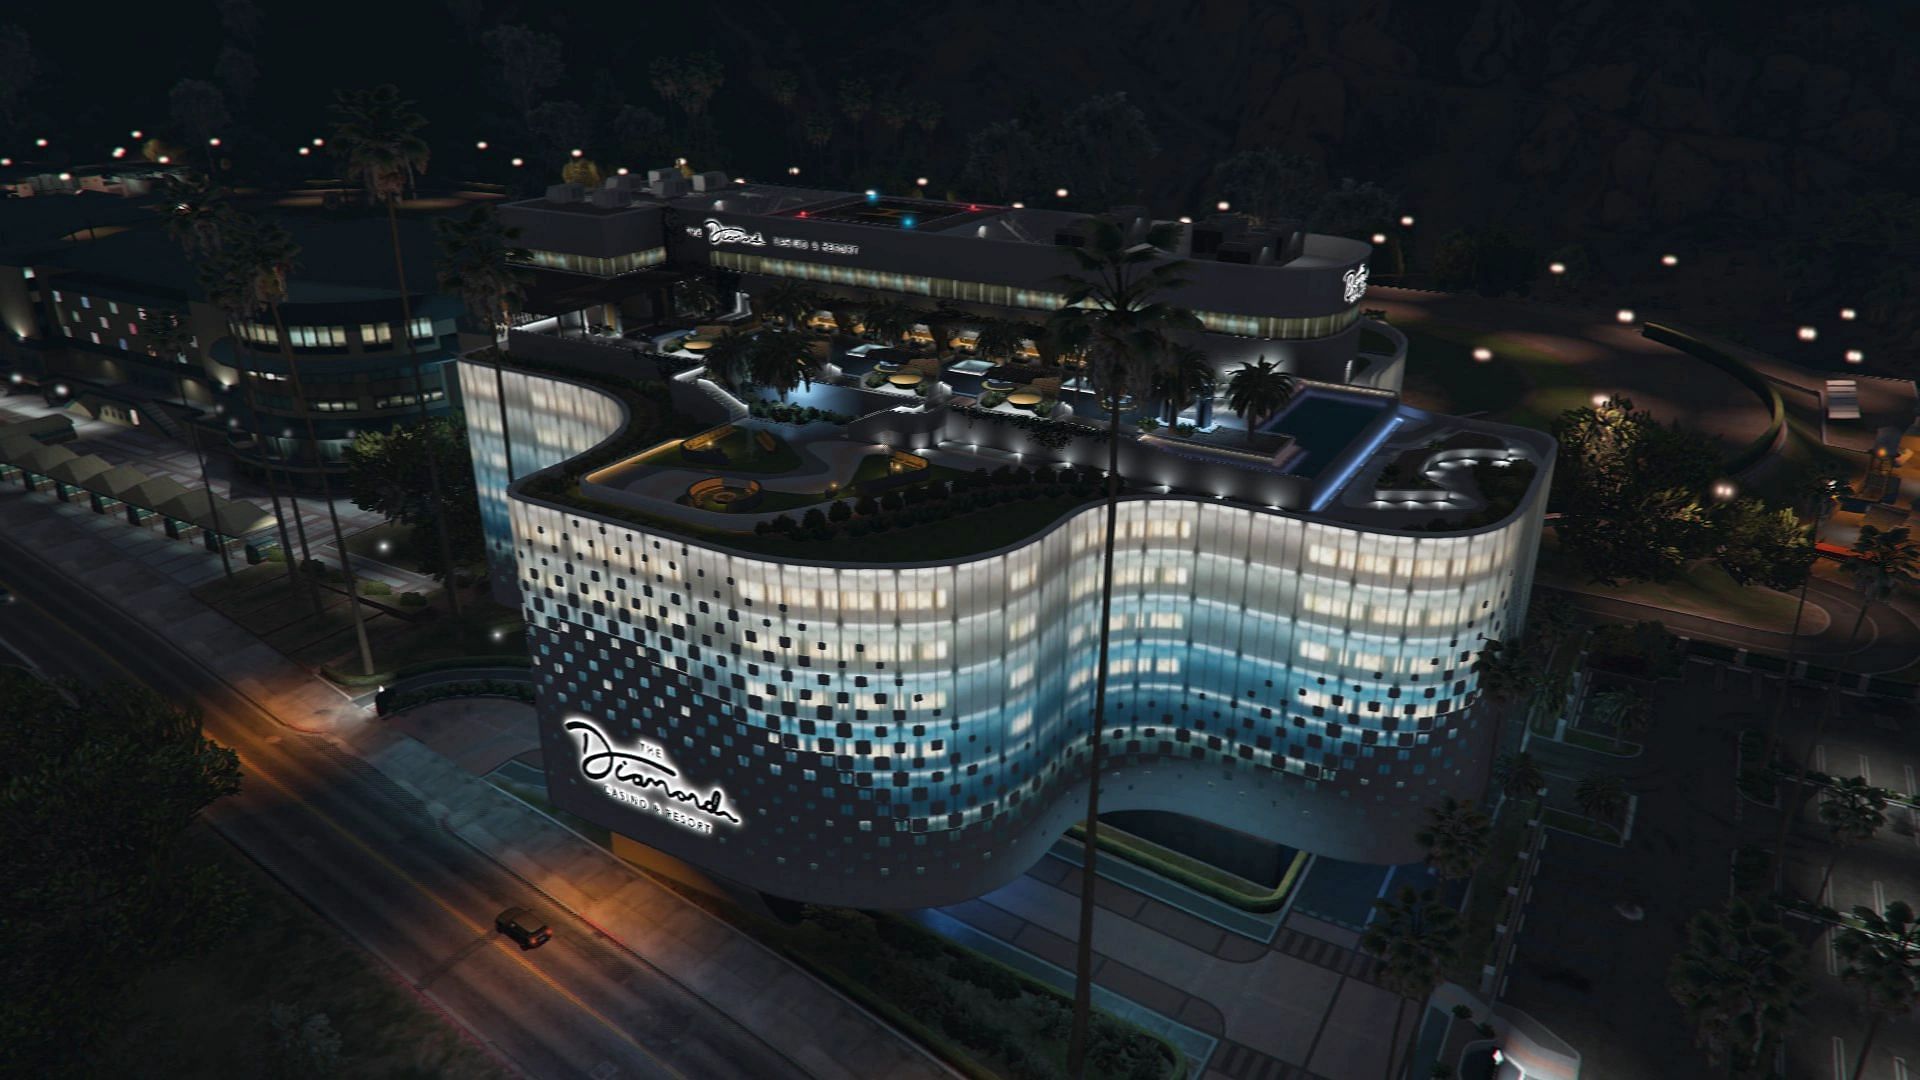 The casino in GTA Online offers many ways to make money (Image via Rockstar Games)